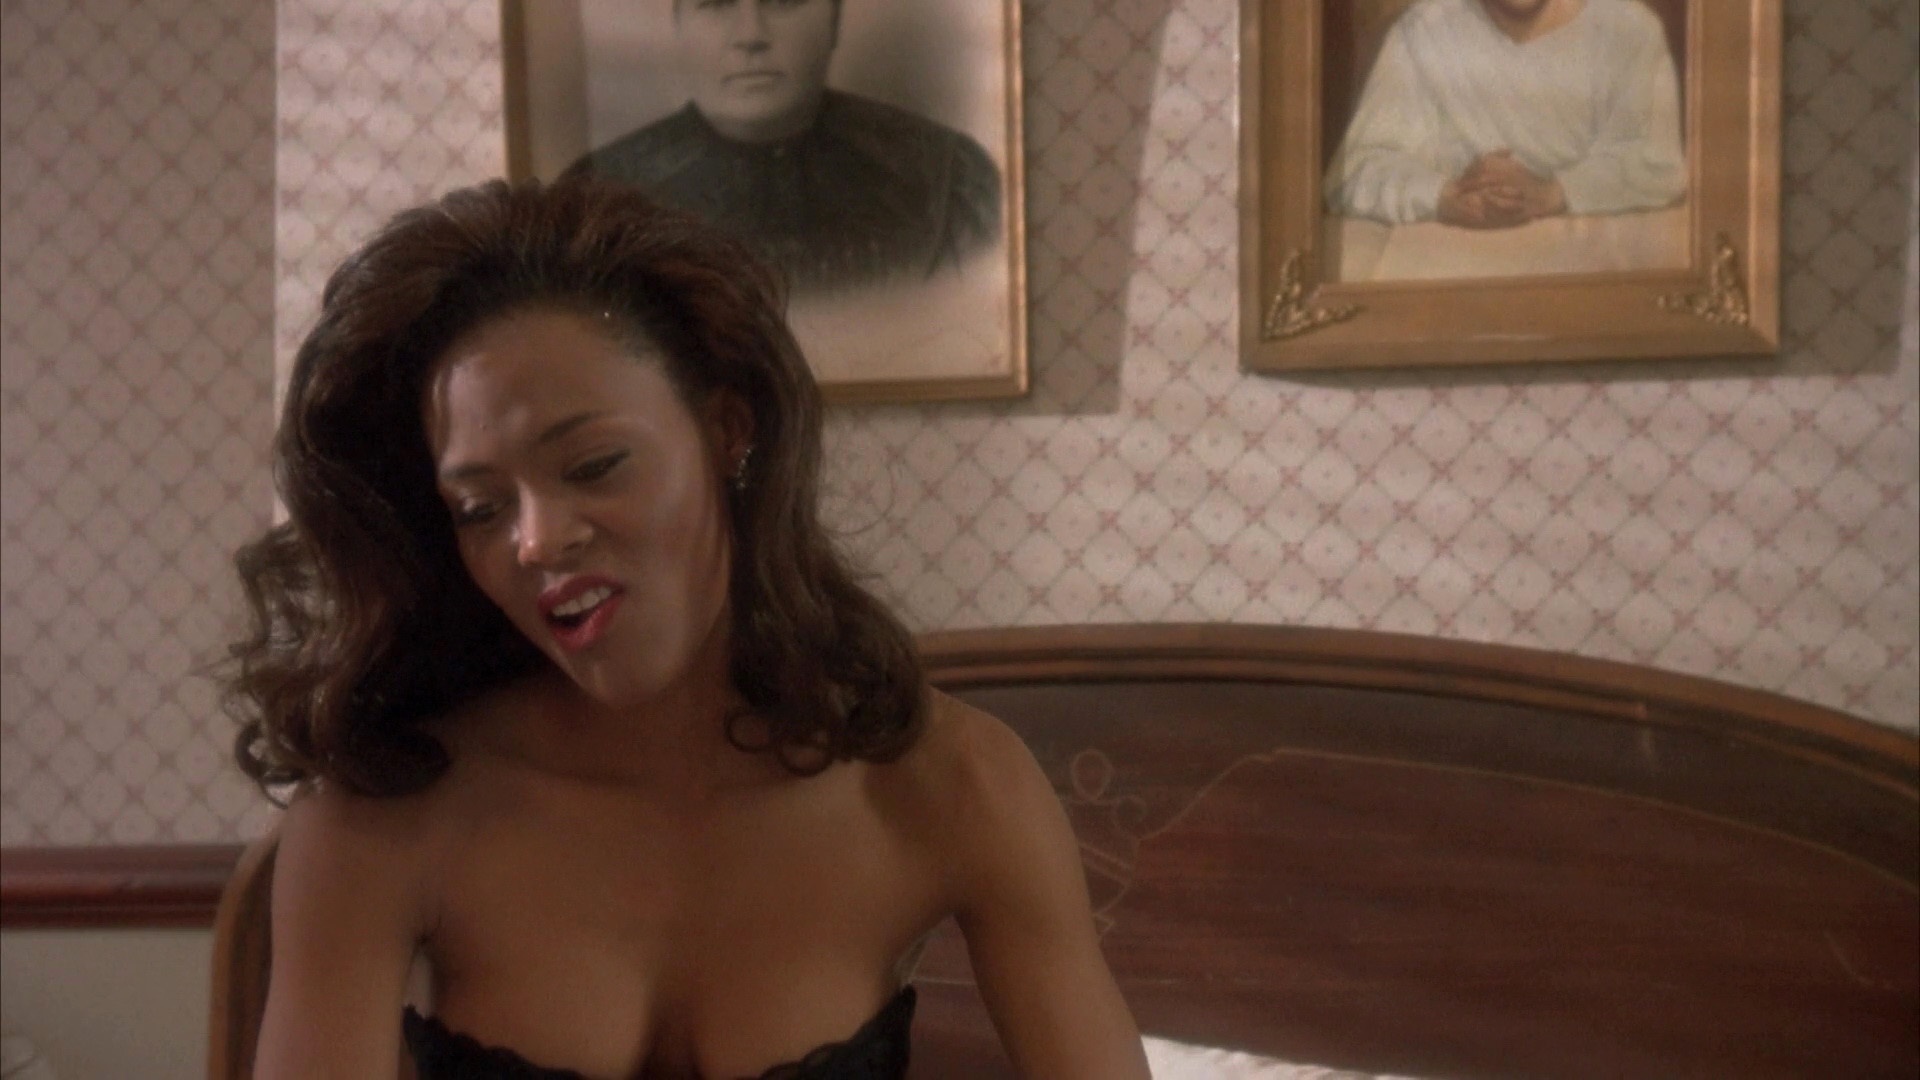 Nude pictures of robin givens